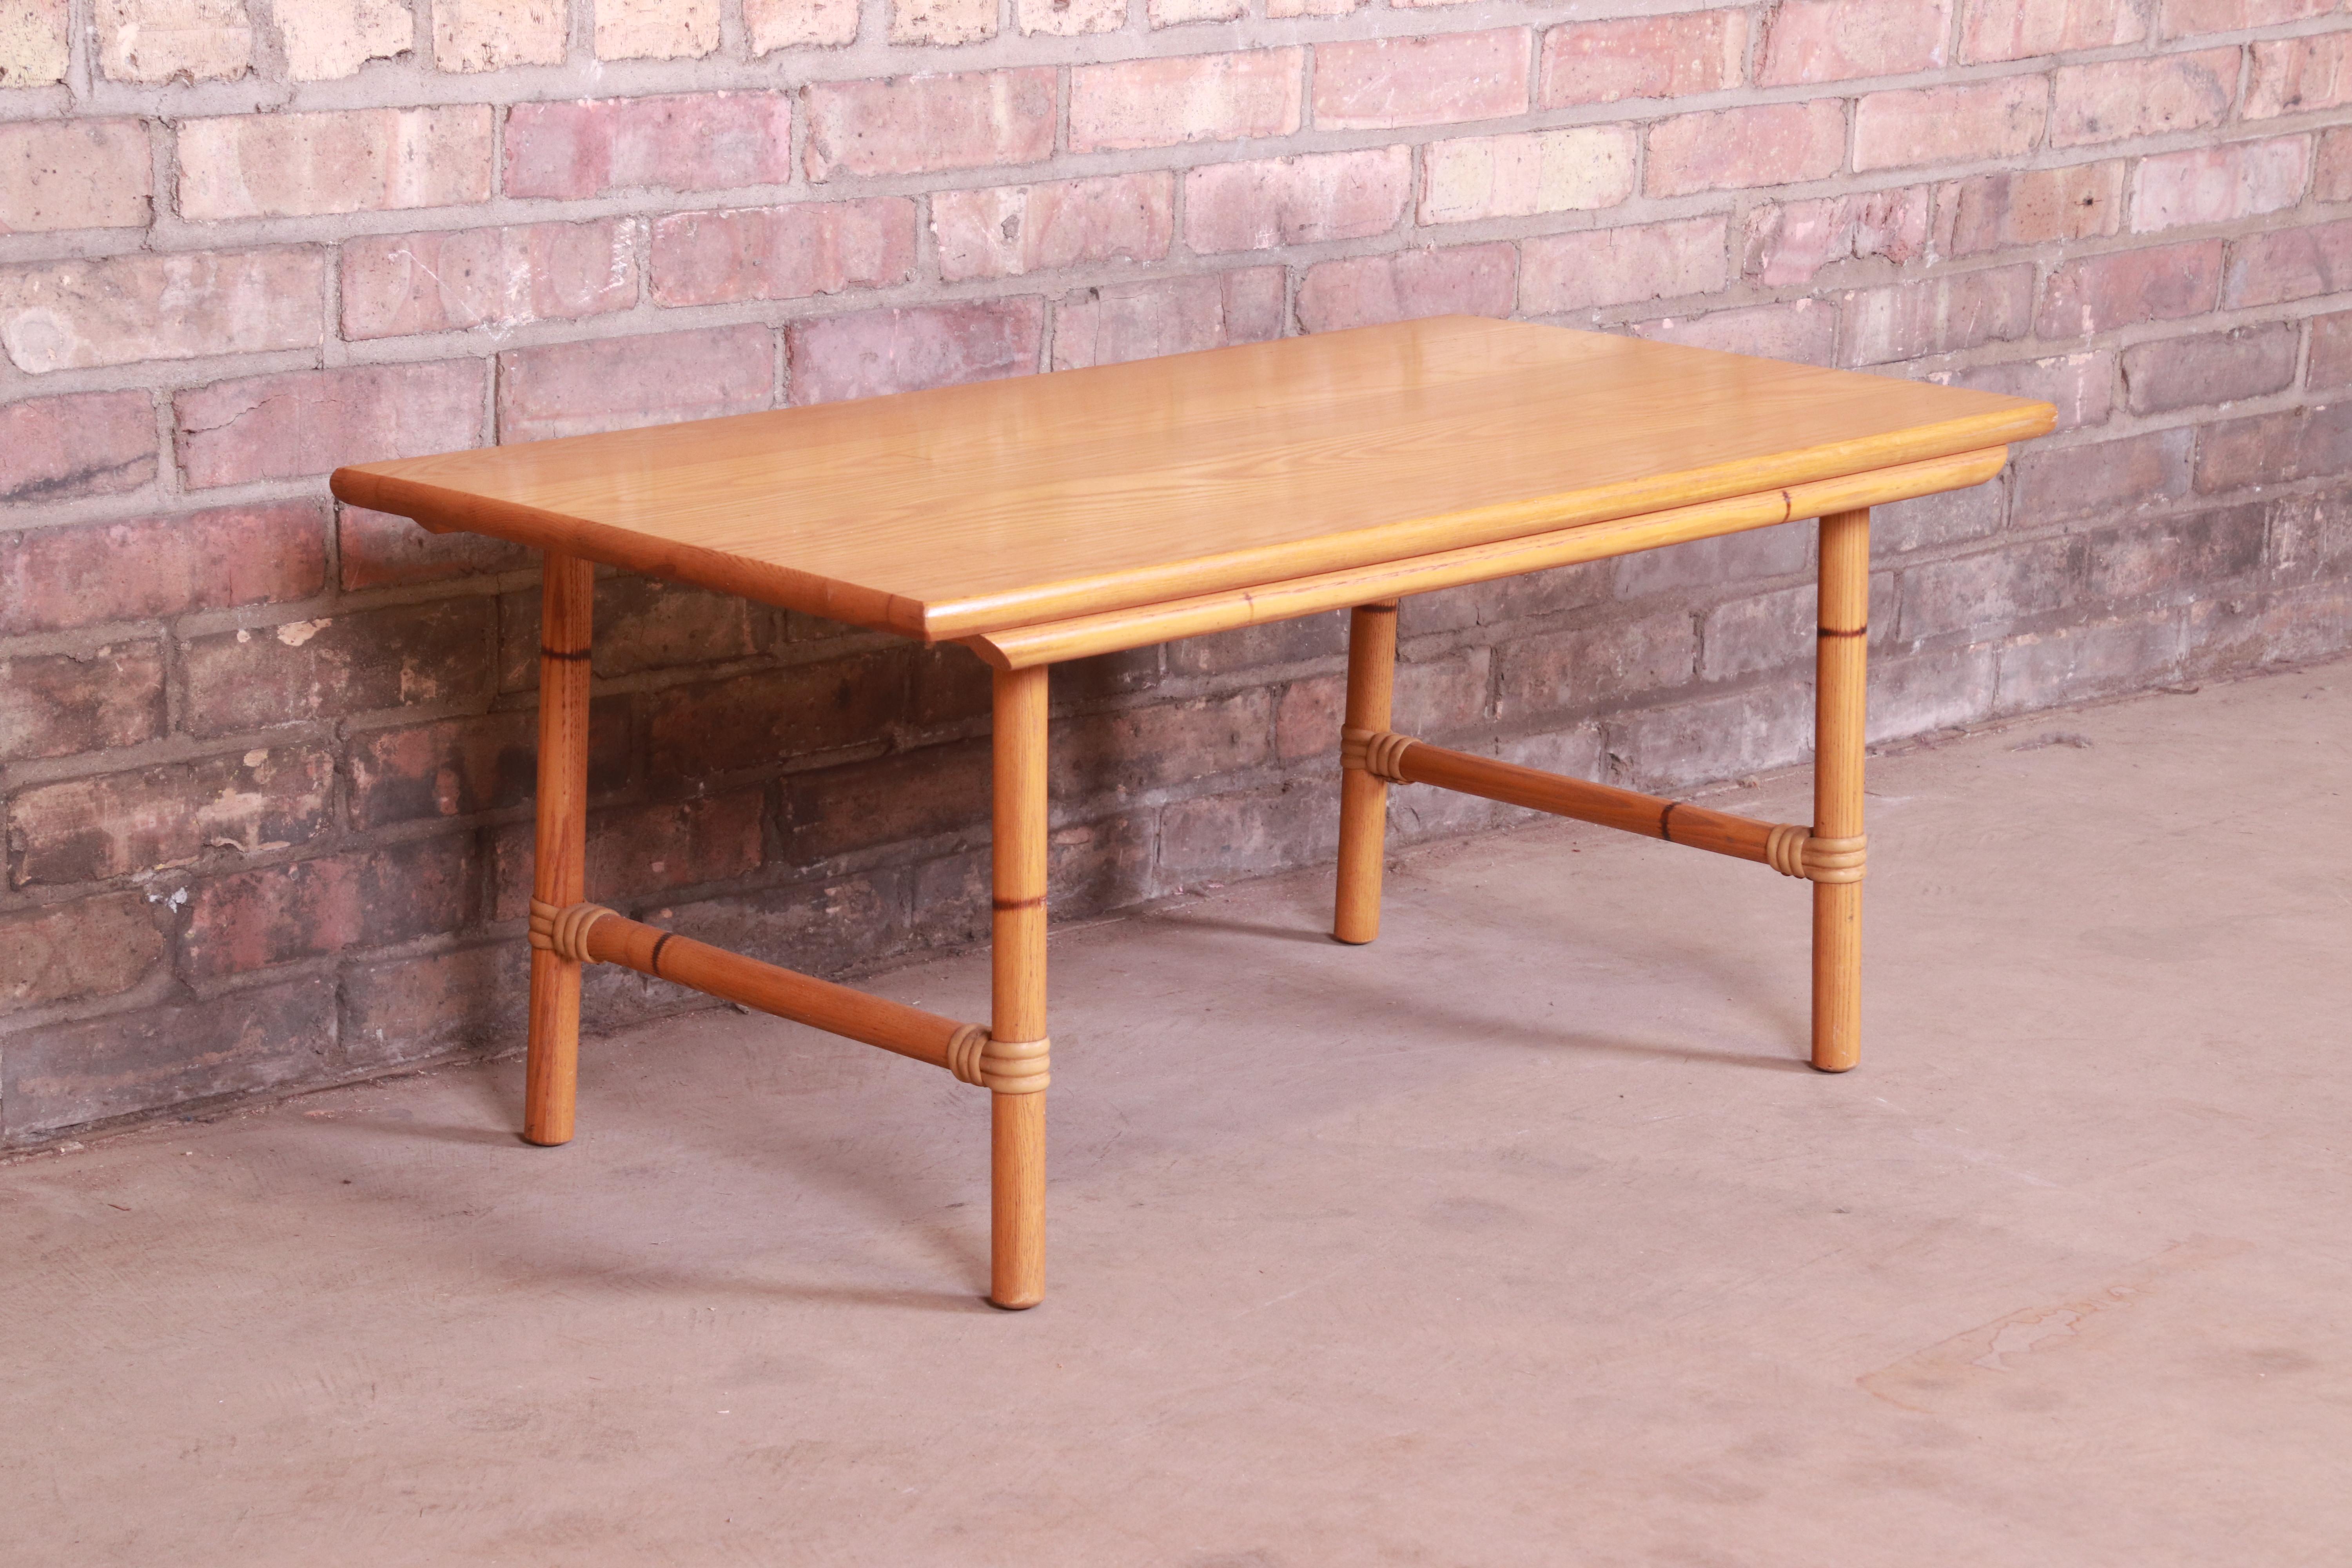 Mid-20th Century Heywood Wakefield Ashcraft Hollywood Regency Bamboo Form Coffee Table, 1950s For Sale